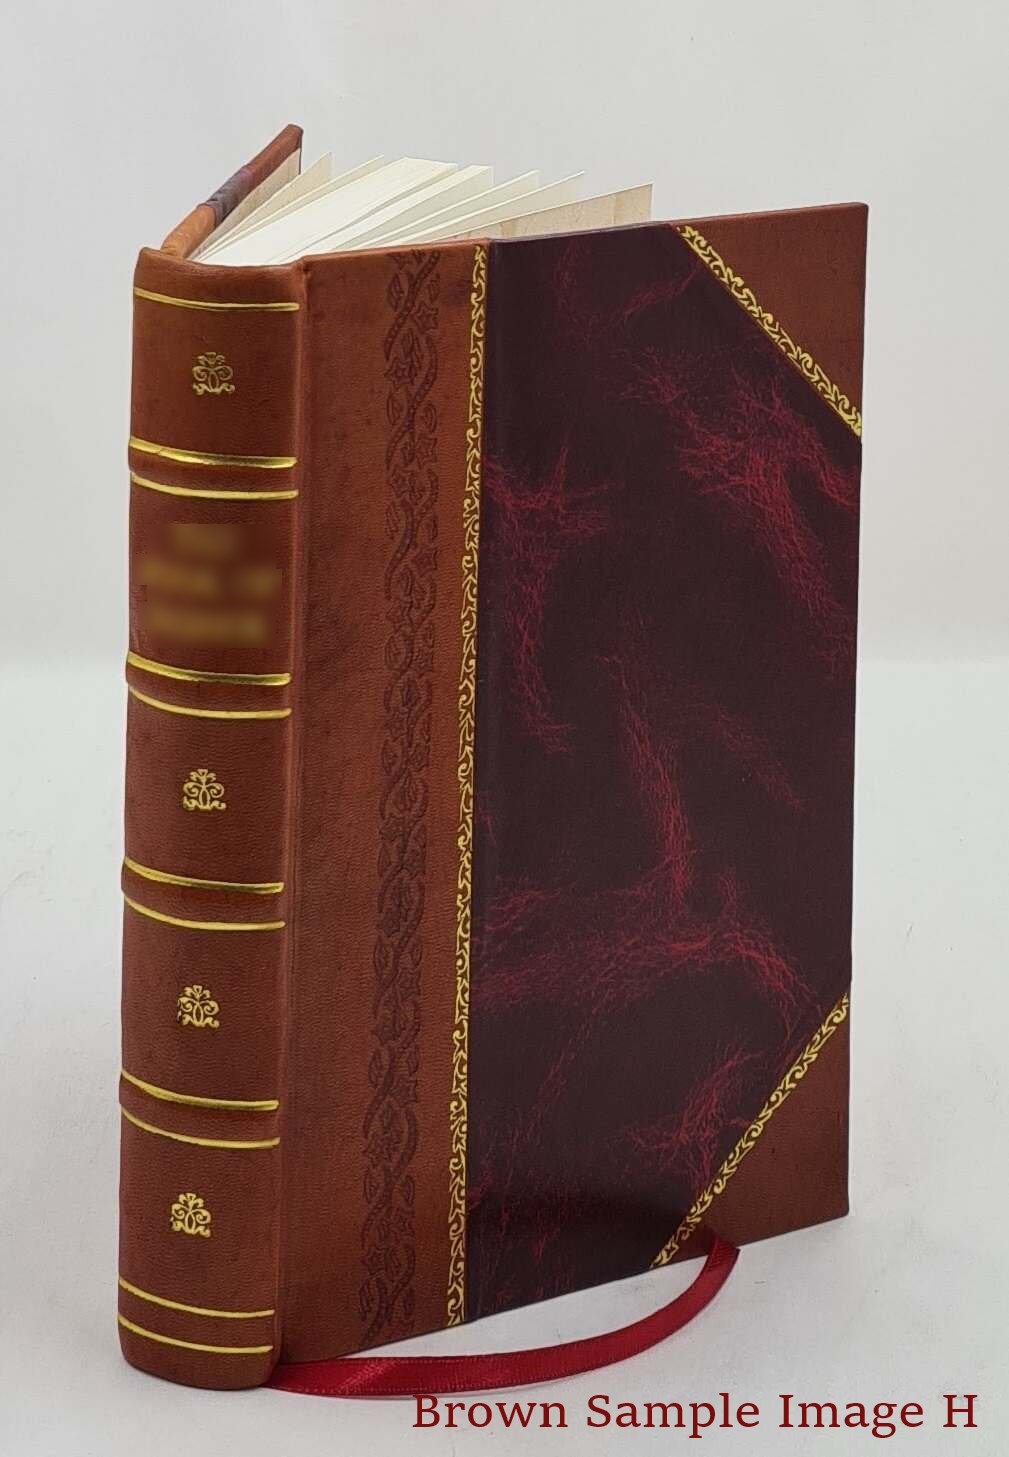 Primary image for Paul Foster Case - The Tree of Life - 1950 1950 [Leather Bound]